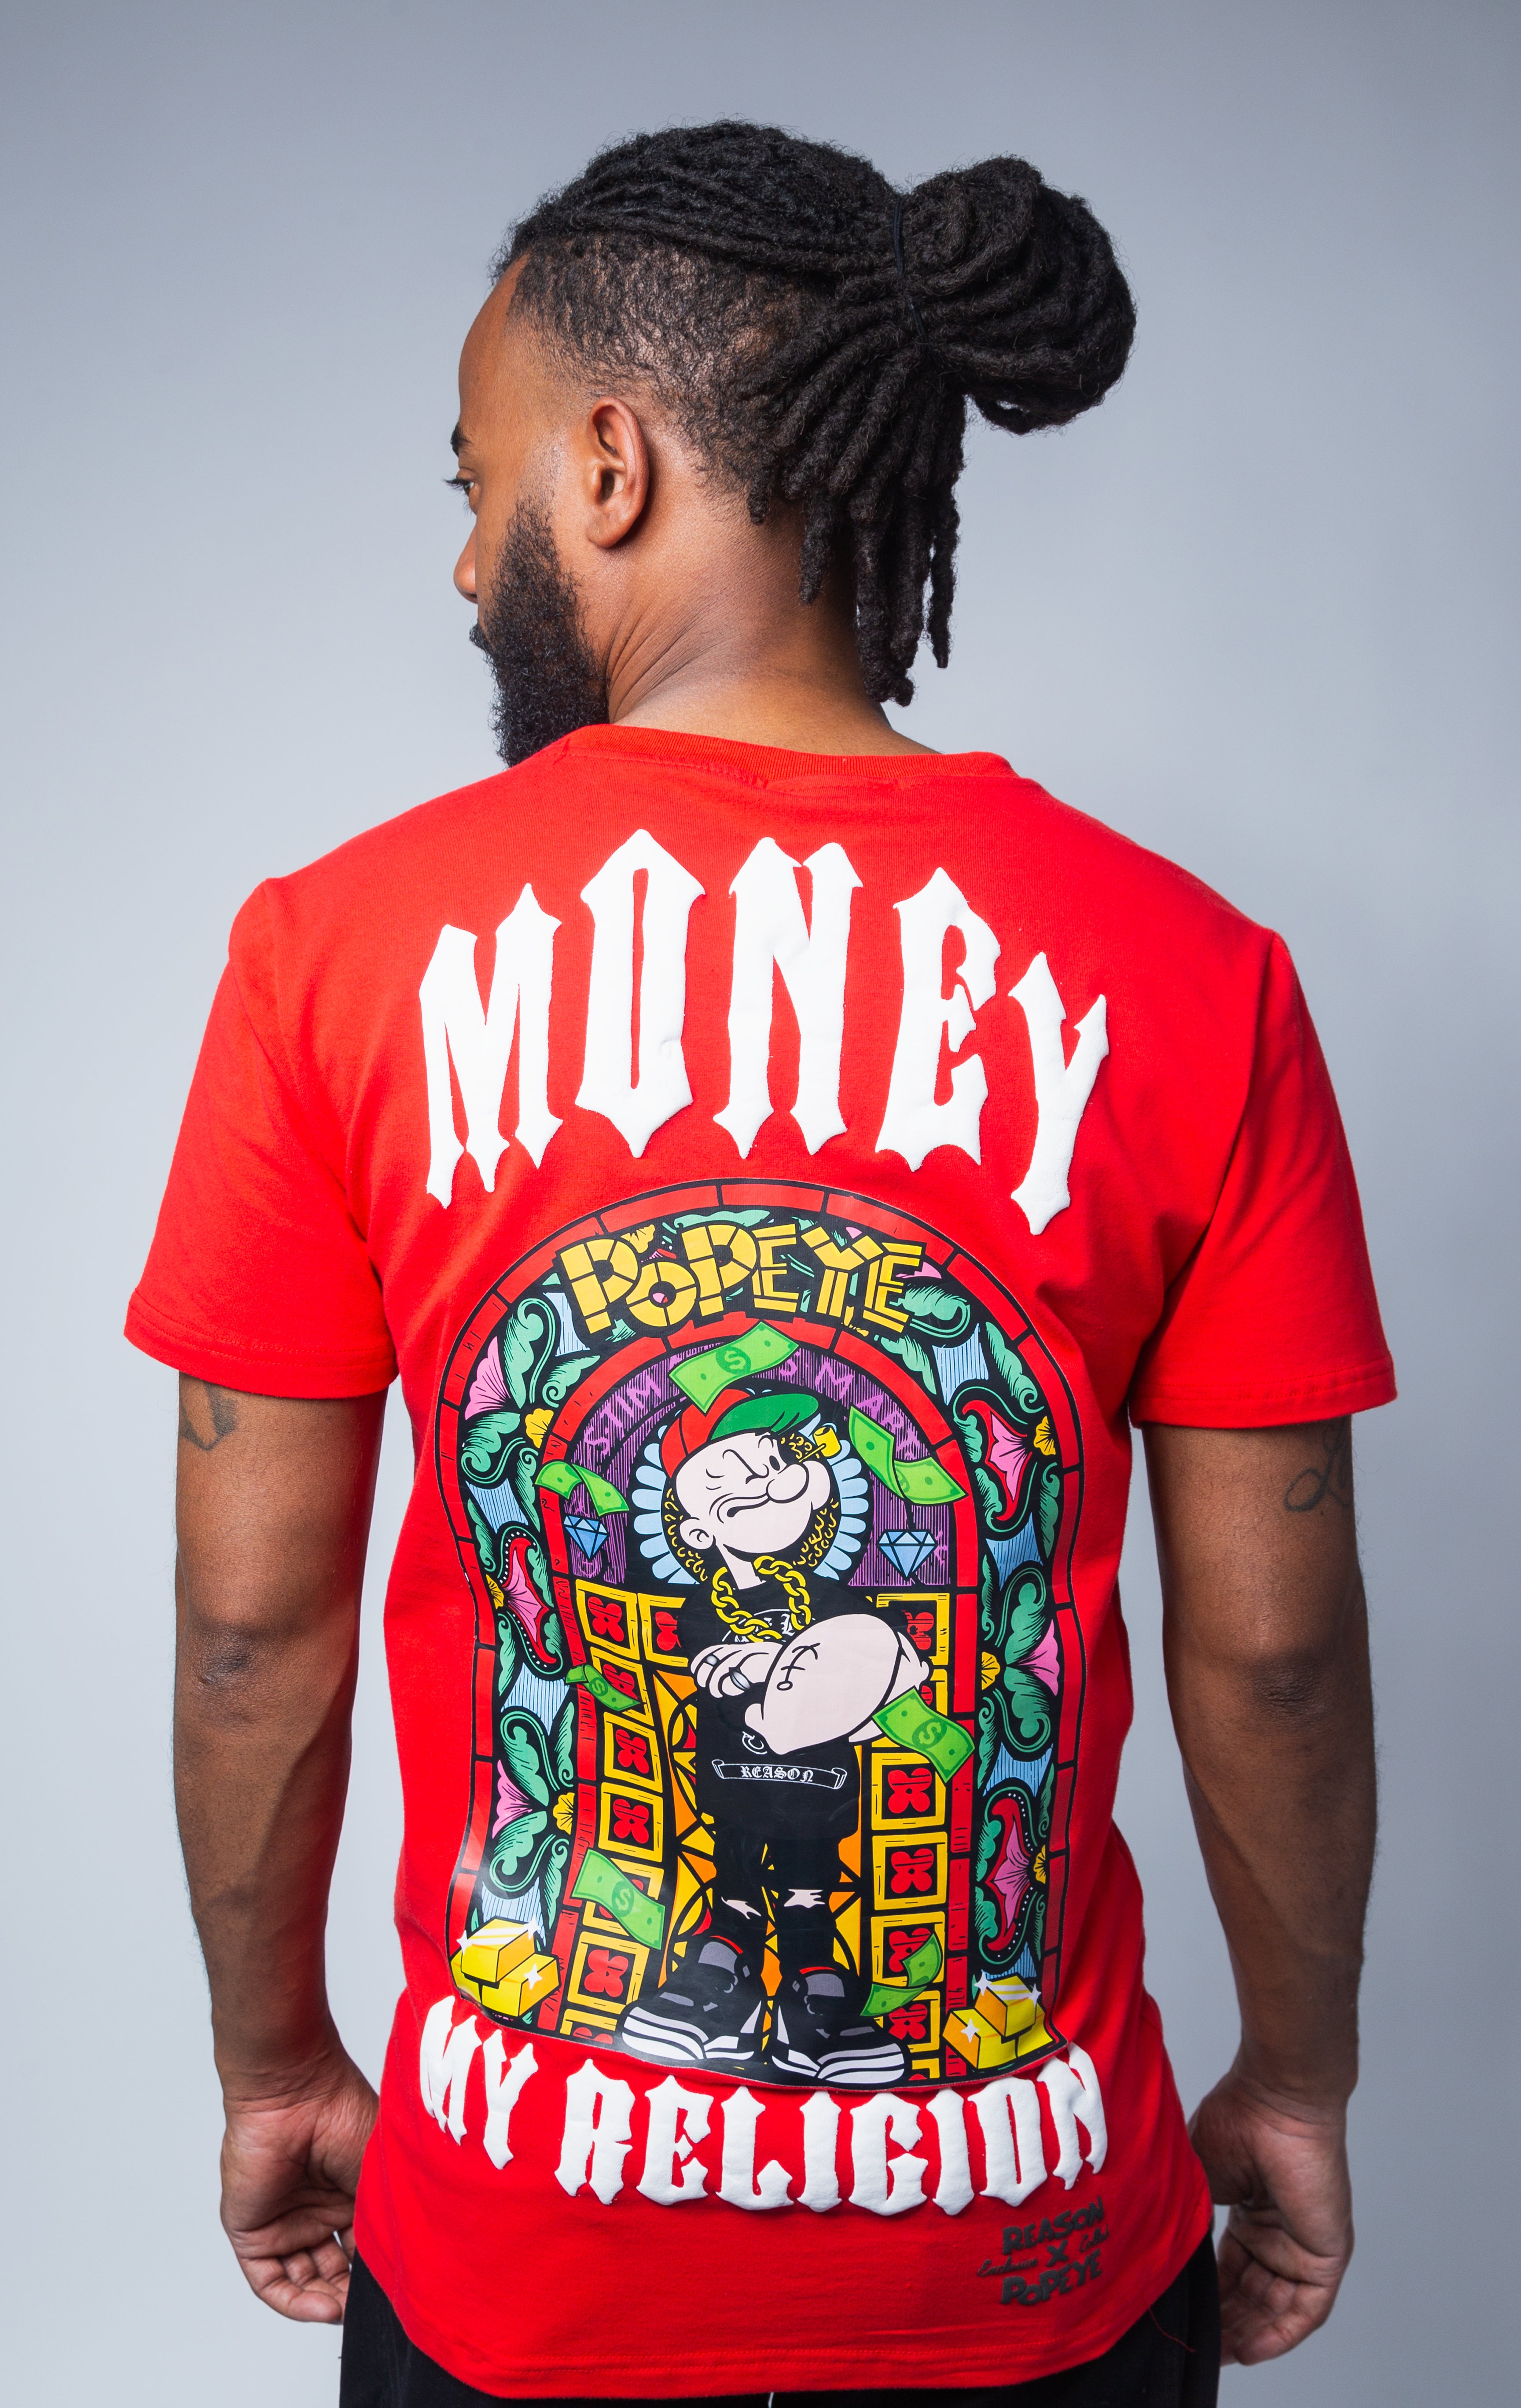 RED "MONEY MY RELIGION" GRAPHIC T SHIRT